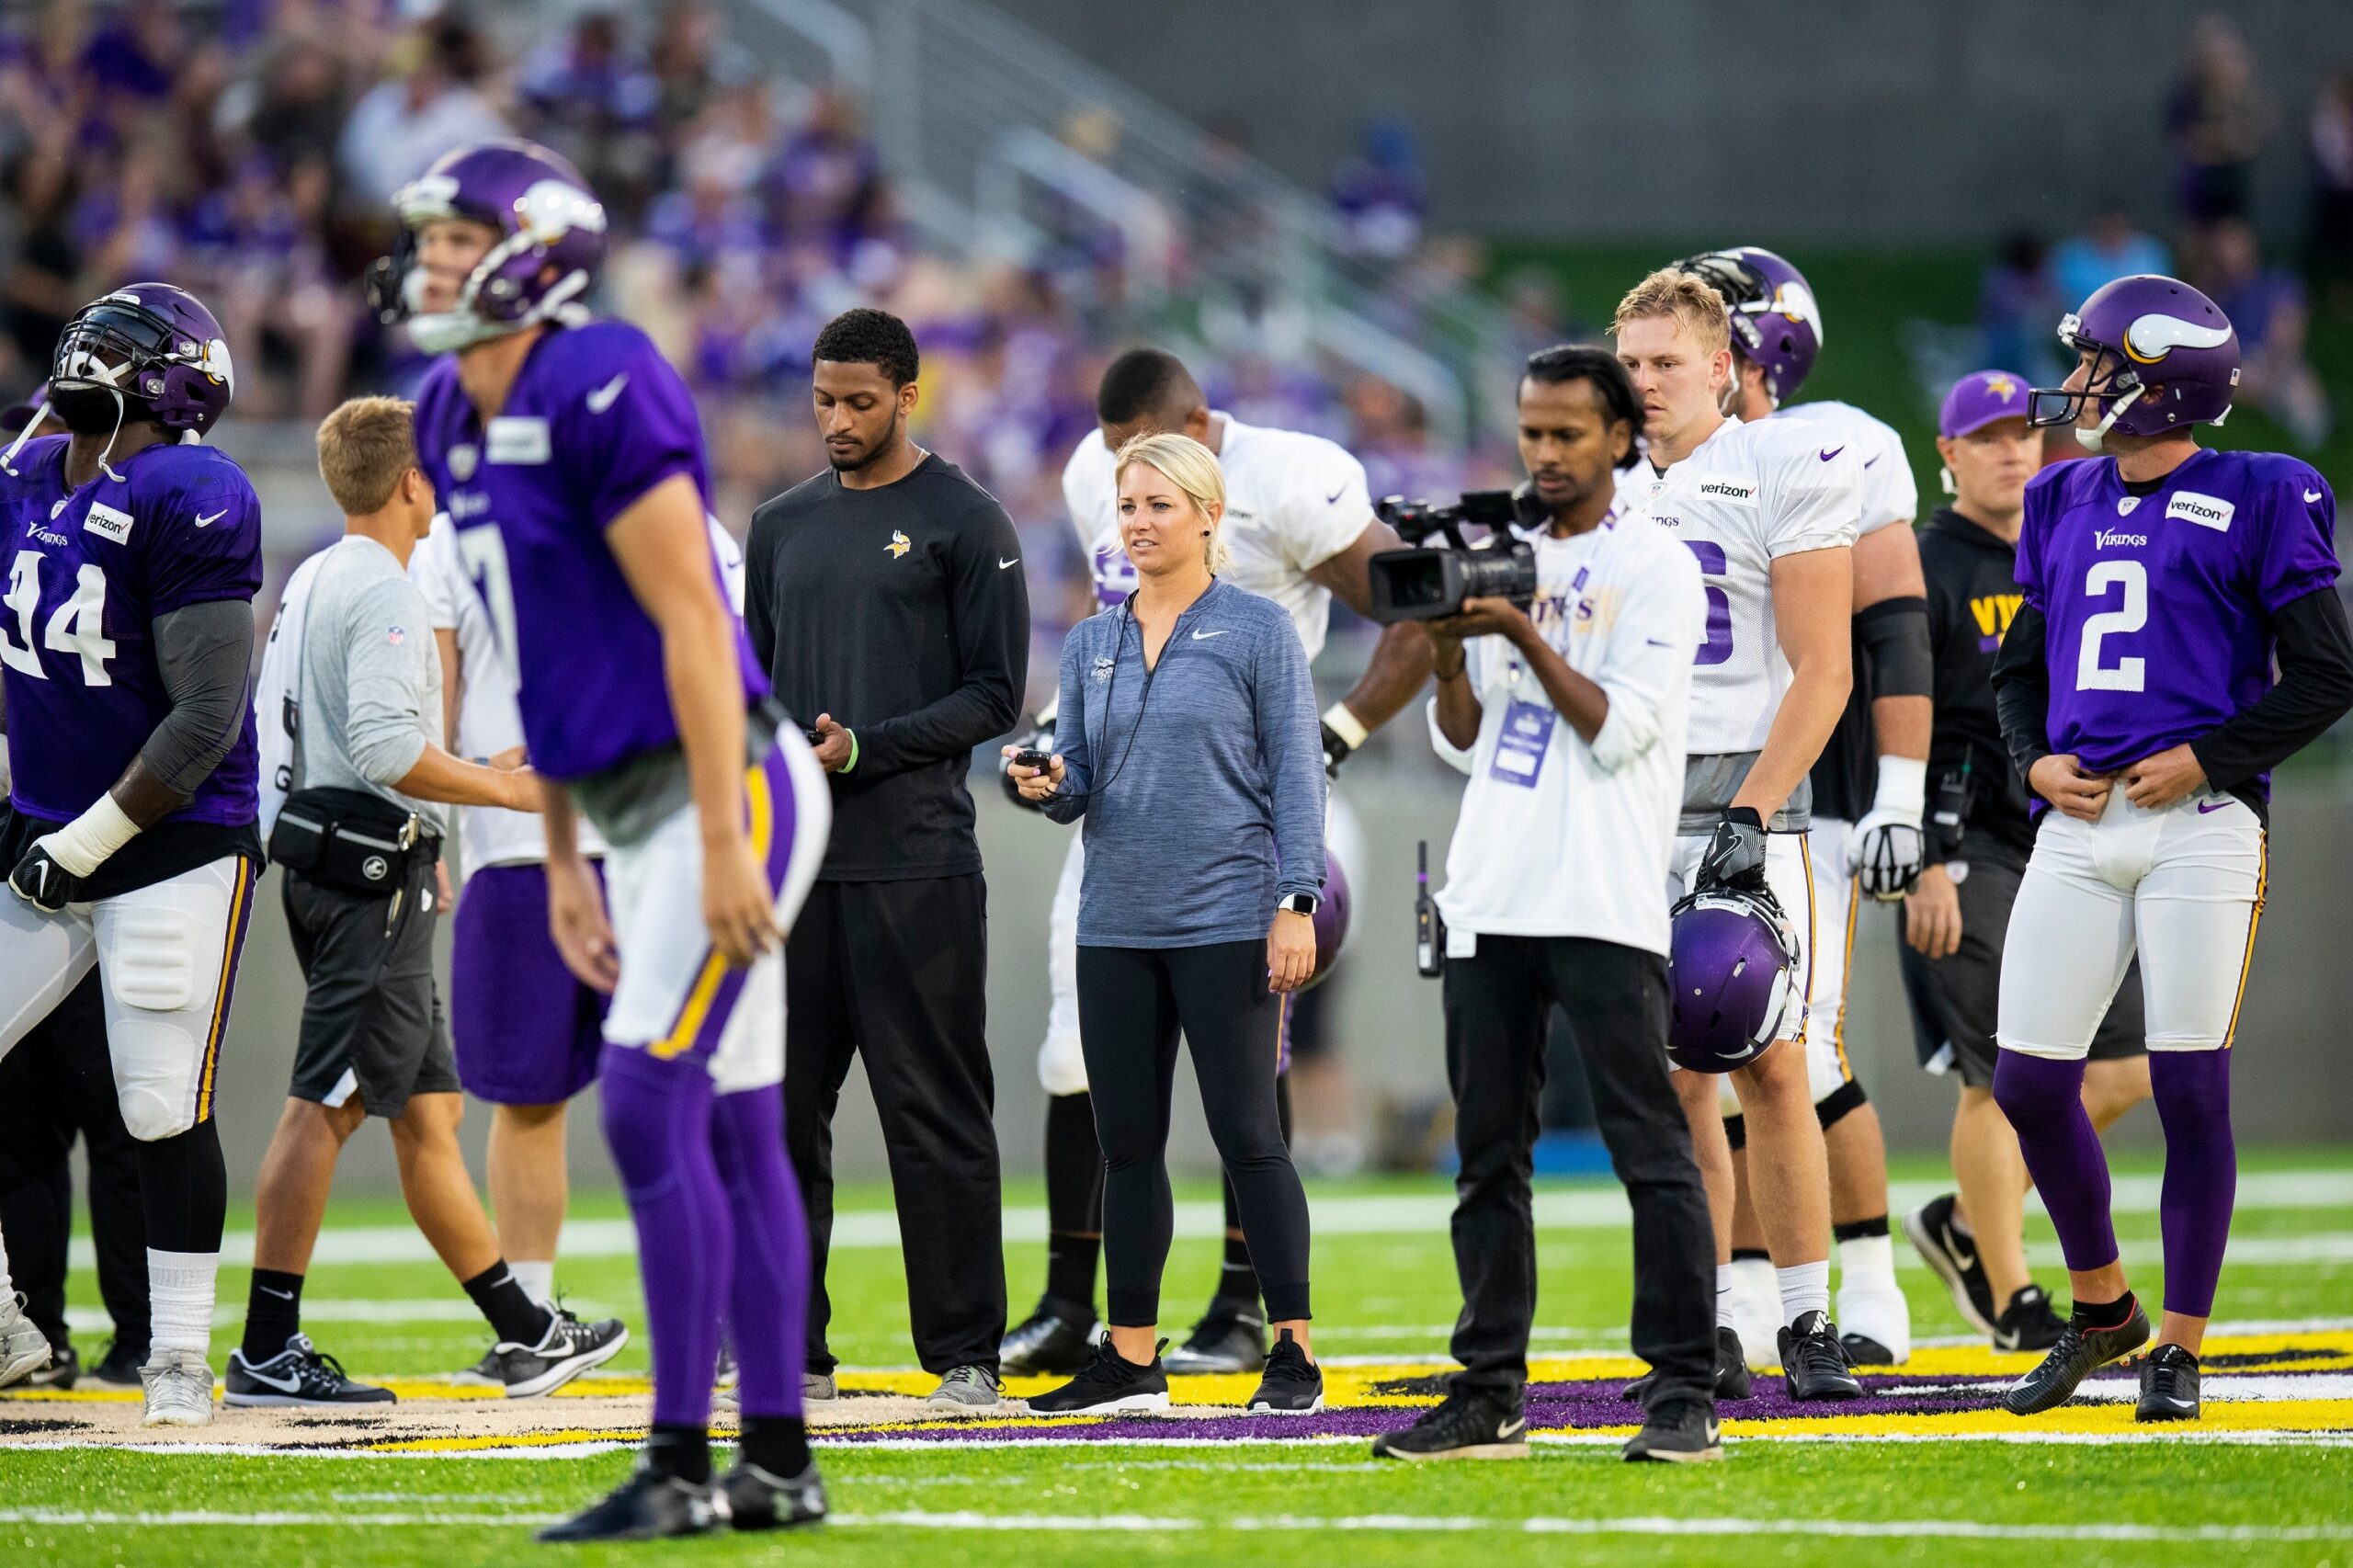 This Wisconsin Native Grew Up A Packers Fan. Now She’s A Vikings Scout